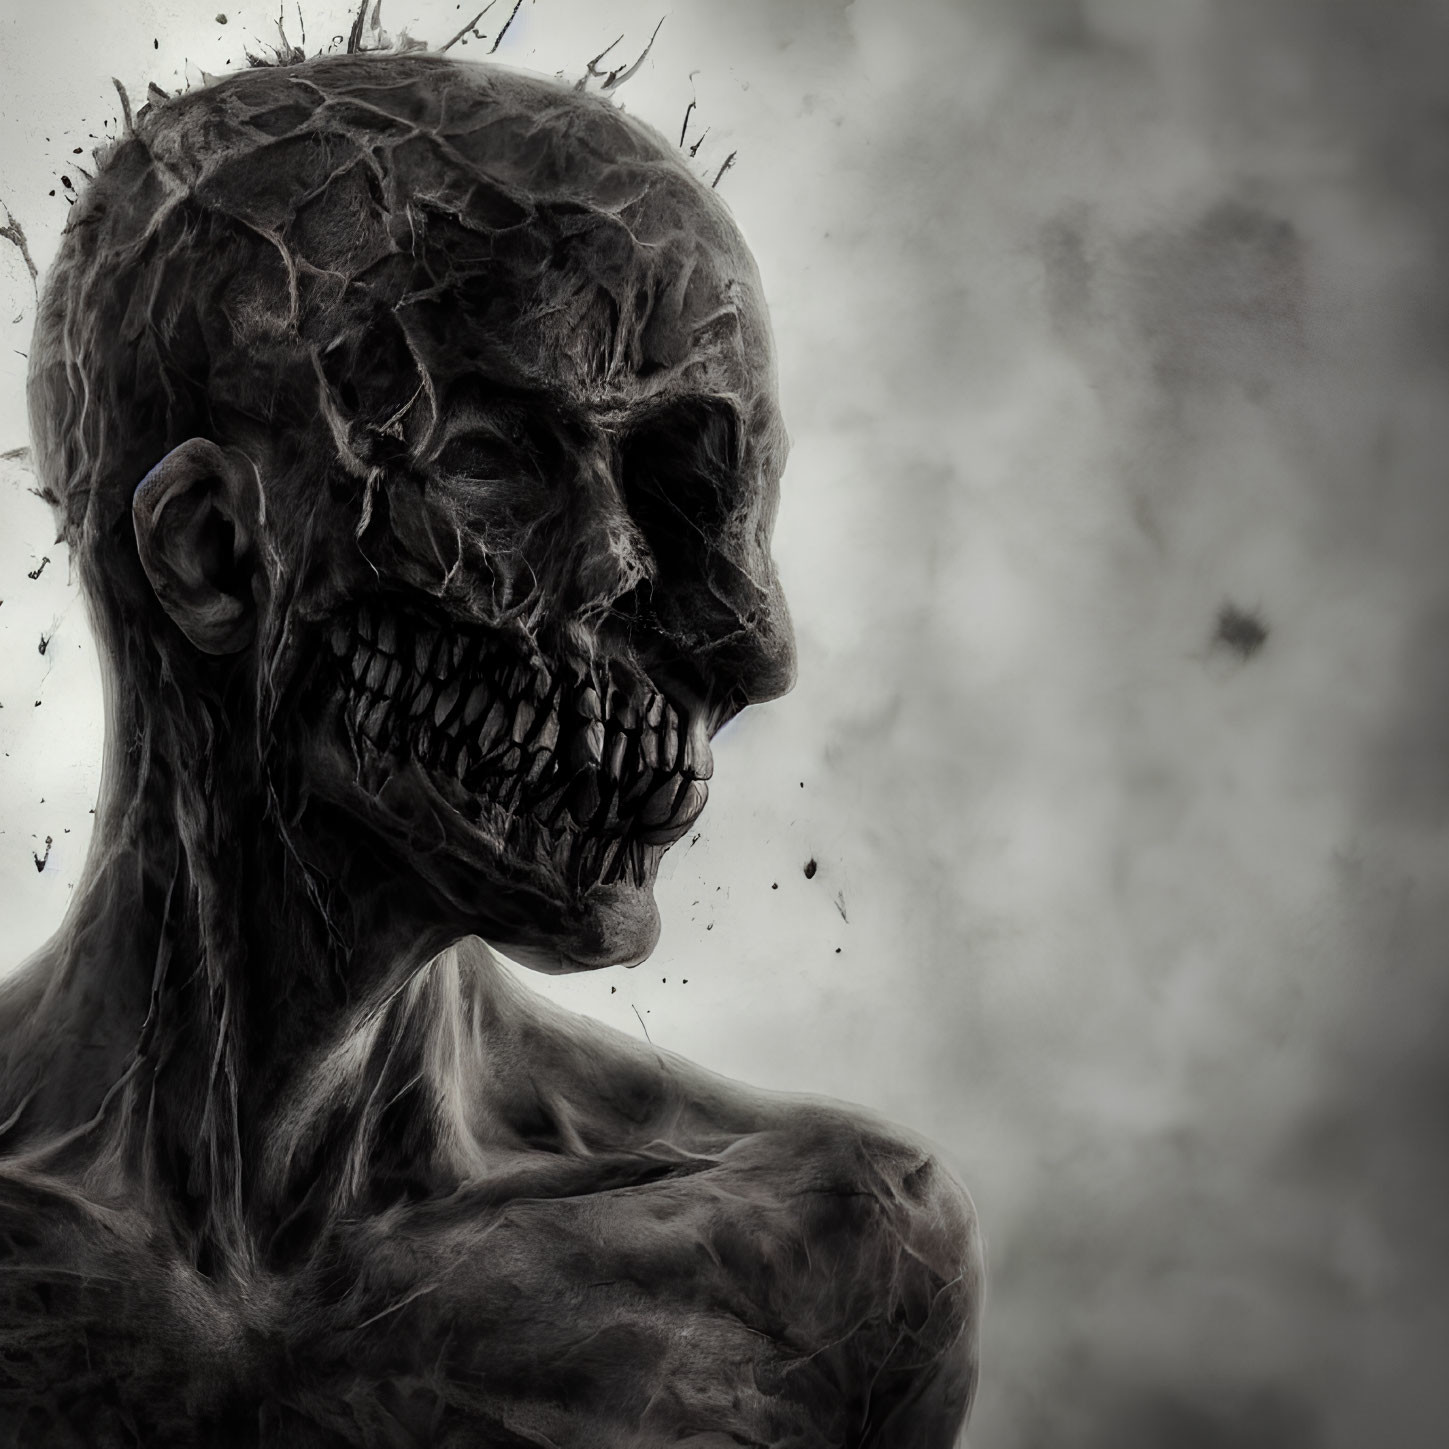 Sinister skeletal figure with cracked skin in monochrome art